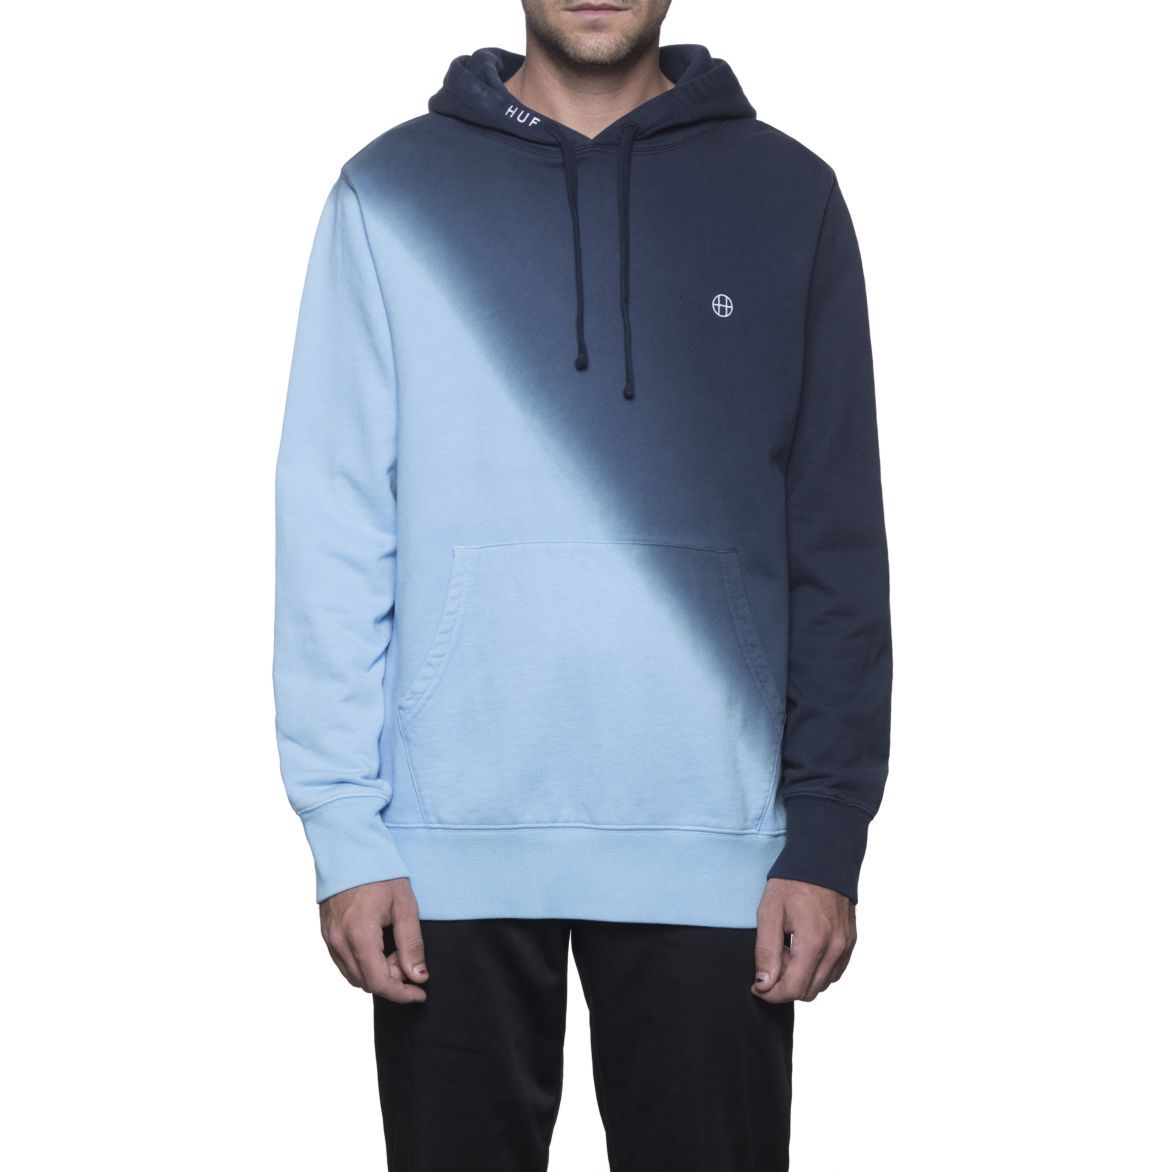 HUF ARNOLD PULLOVER HOODY // NAVY-The Collateral